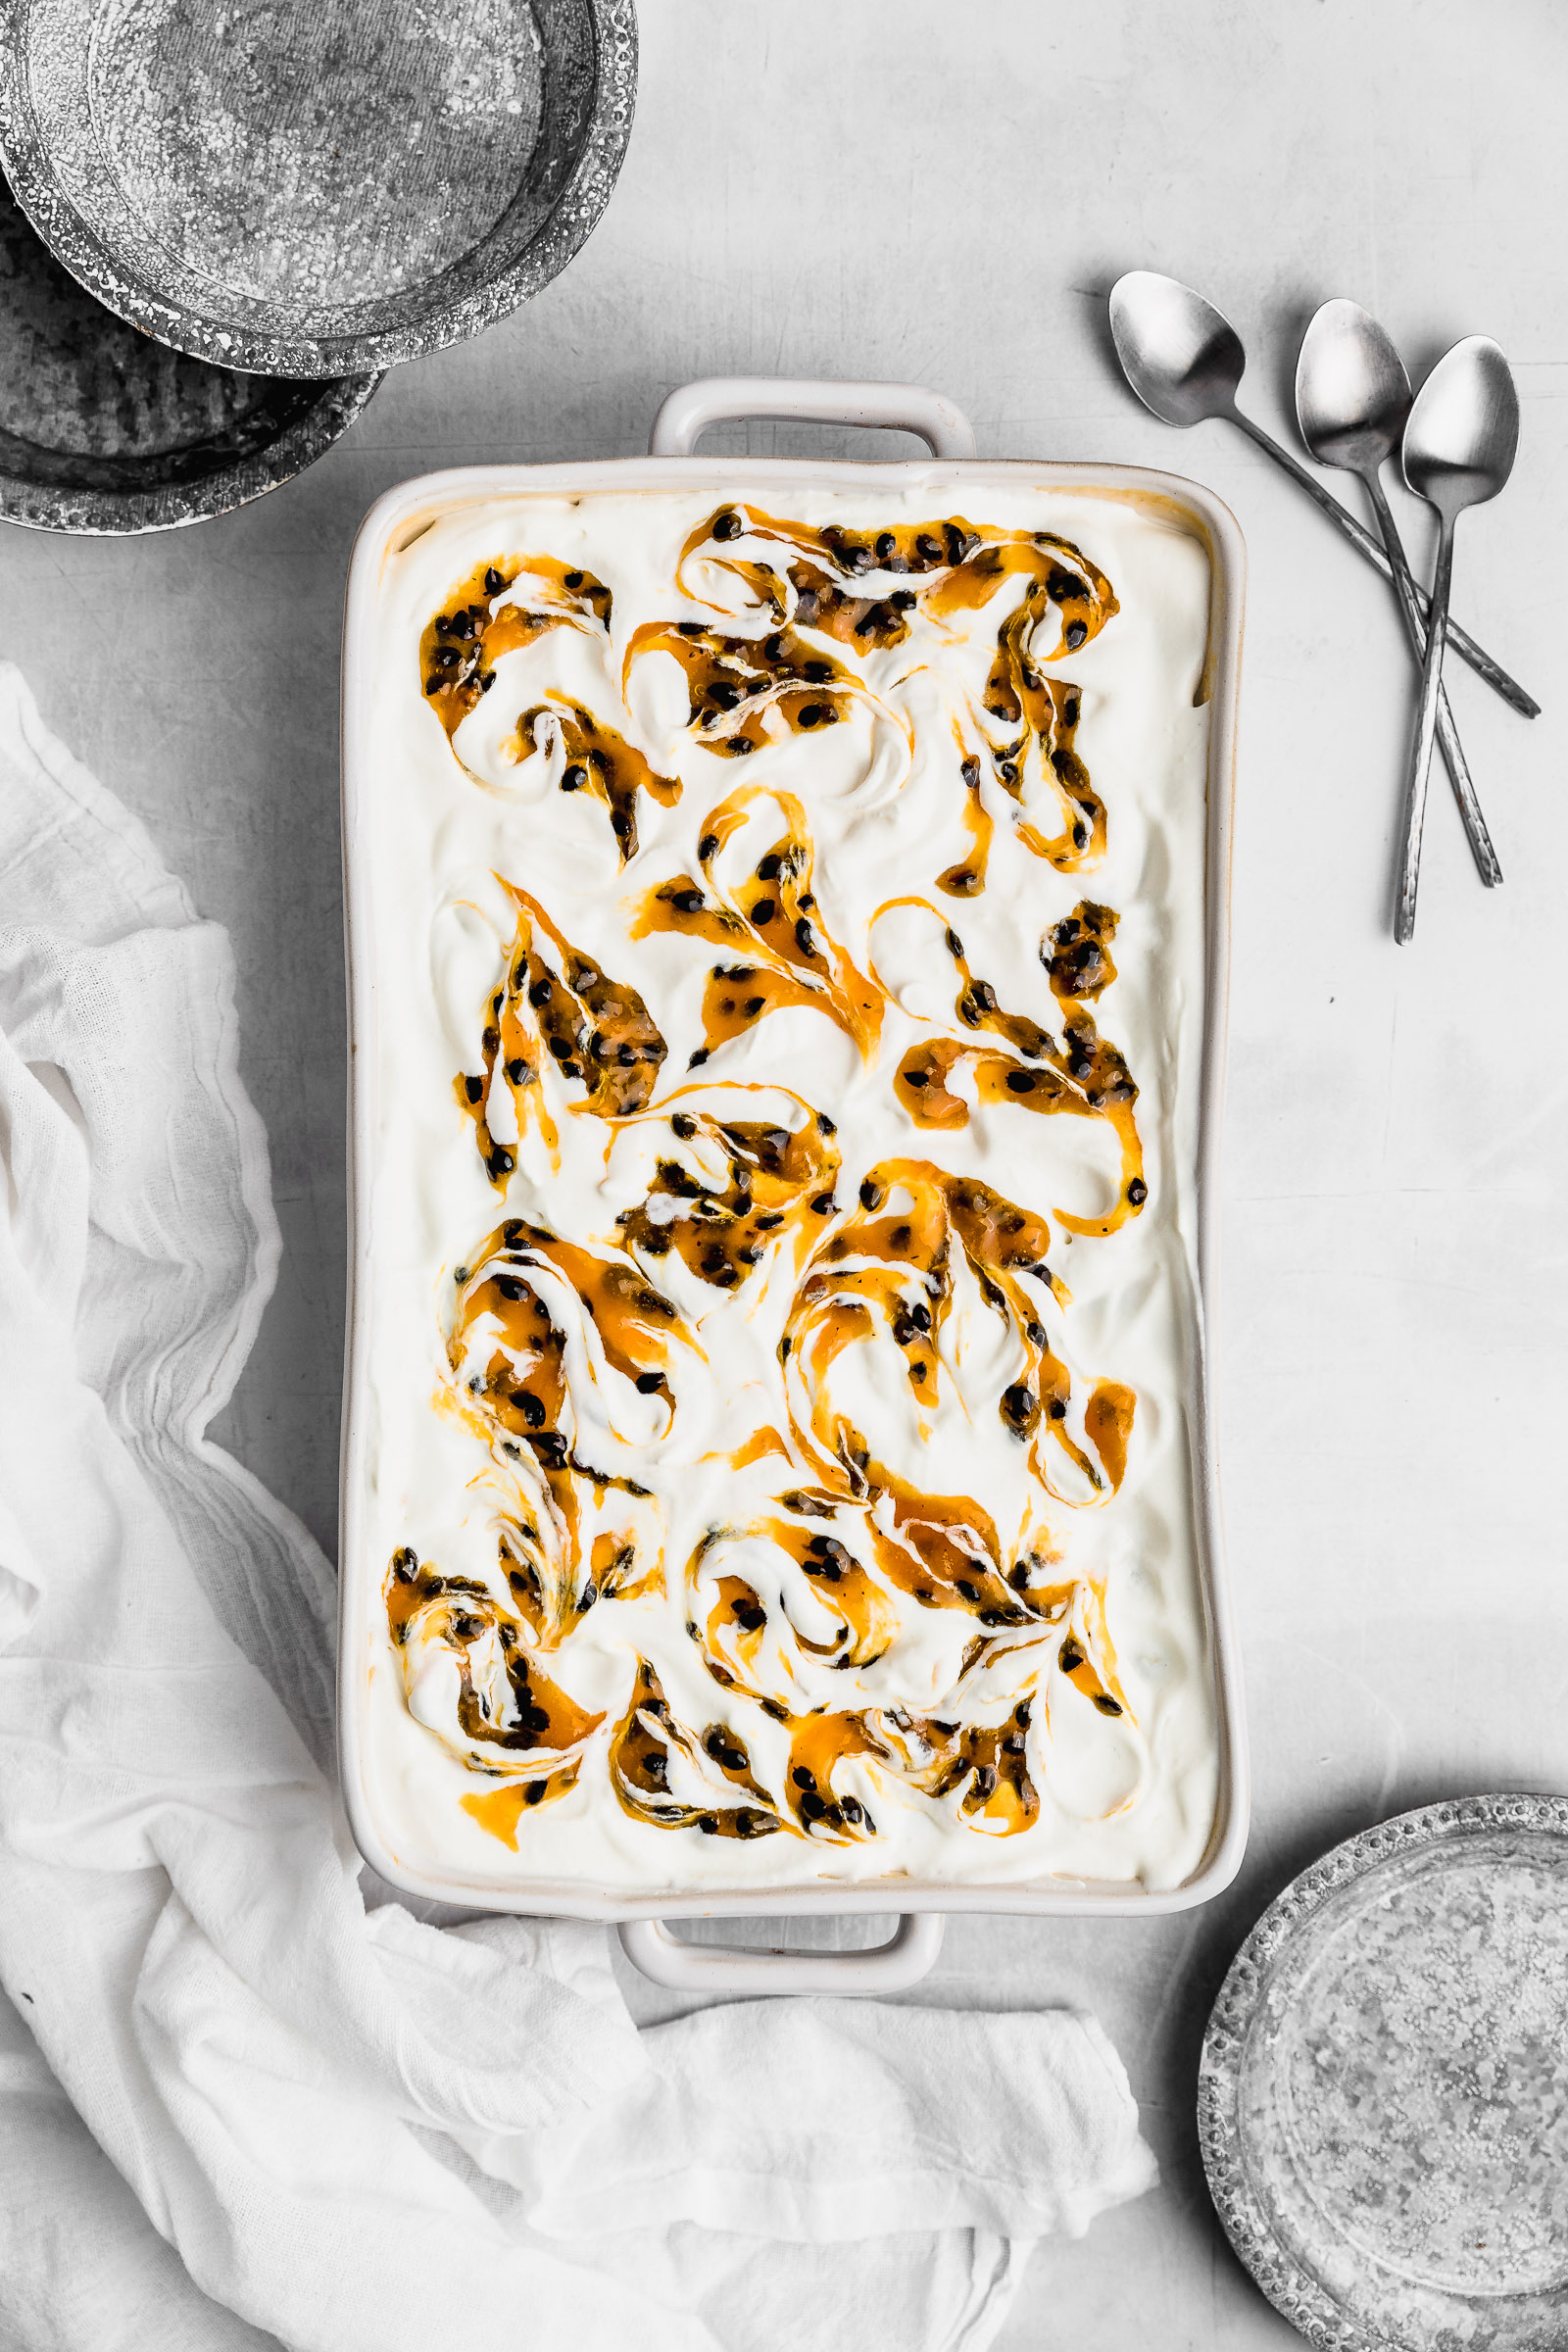 Top view of a passion fruit tres leches, showing the whipped cream marbled with passion fruit sauce.